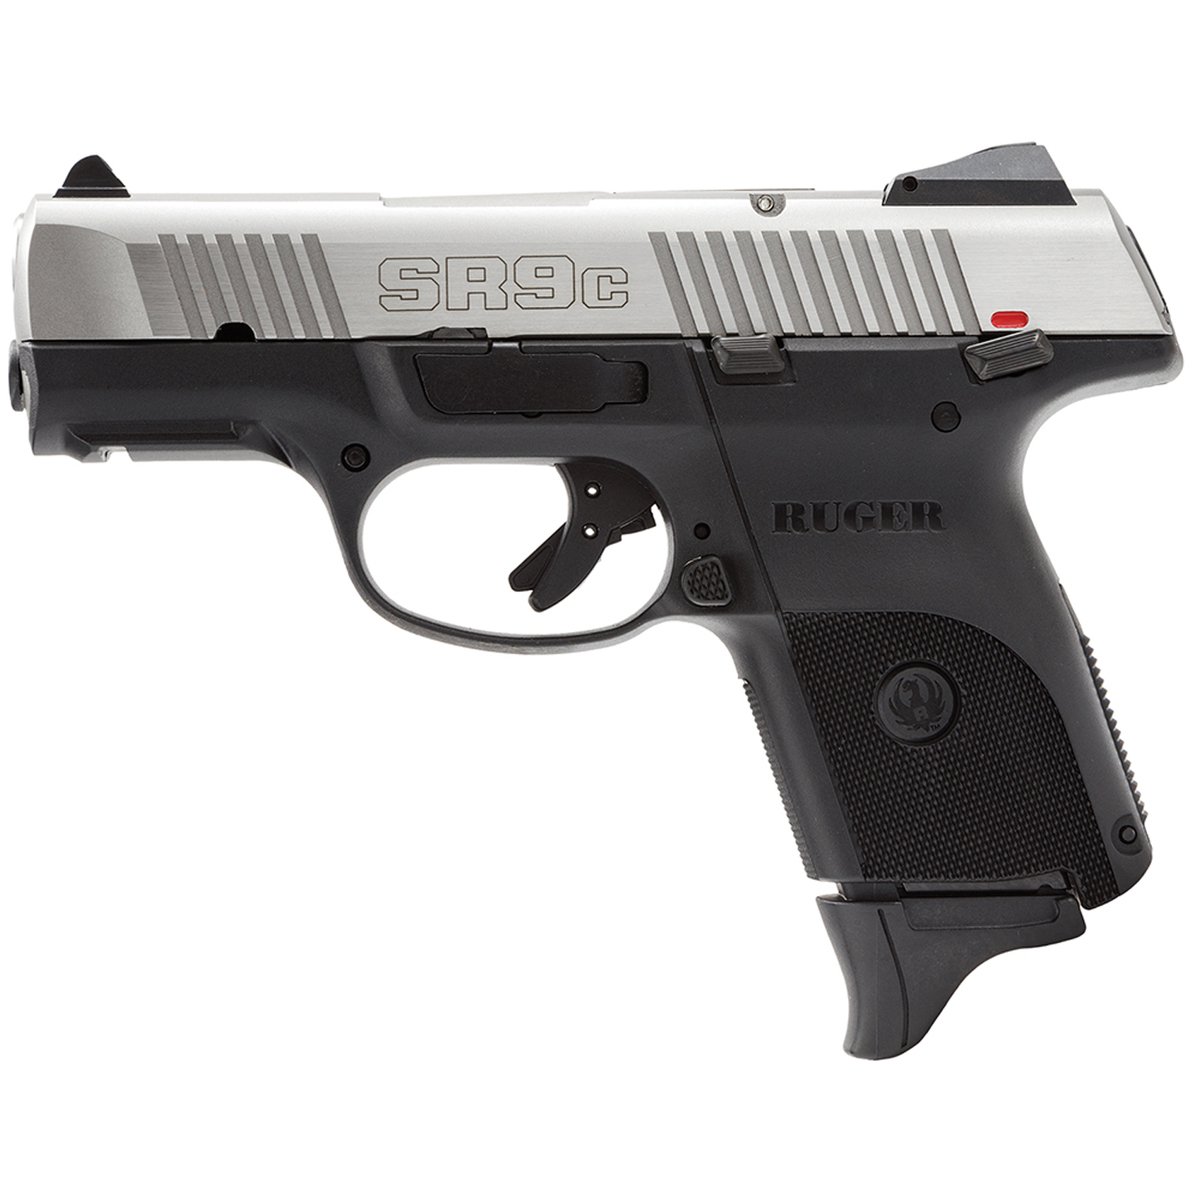 [Handgun] Ruger SR9c 9mm Luger 3.4in Stainless Pistol - 17+1 Rounds $249.99...